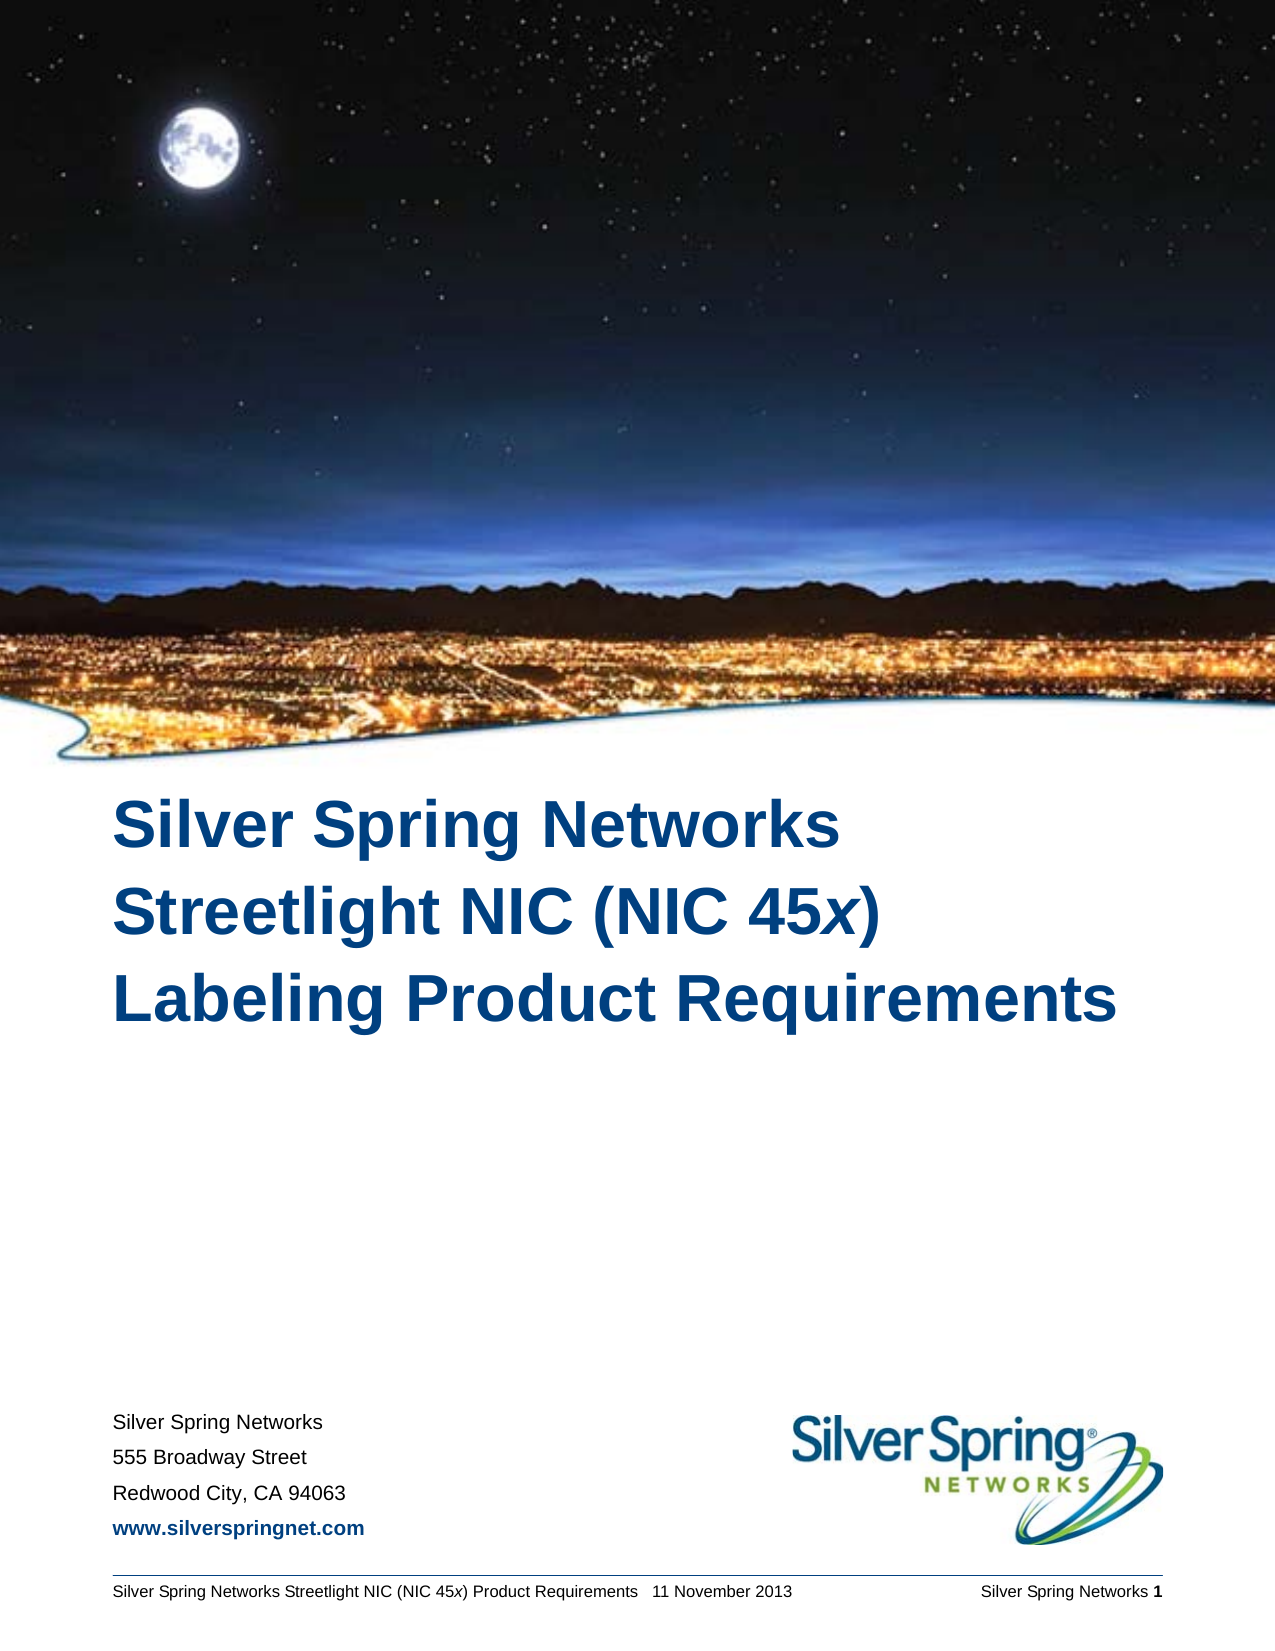 Silver Spring Networks555 Broadway StreetRedwood City, CA 94063www.silverspringnet.comSilver Spring Networks Streetlight NIC (NIC 45x) Product Requirements   11 November 2013    Silver Spring Networks 1Silver Spring Networks Streetlight NIC (NIC 45x) Labeling Product Requirements